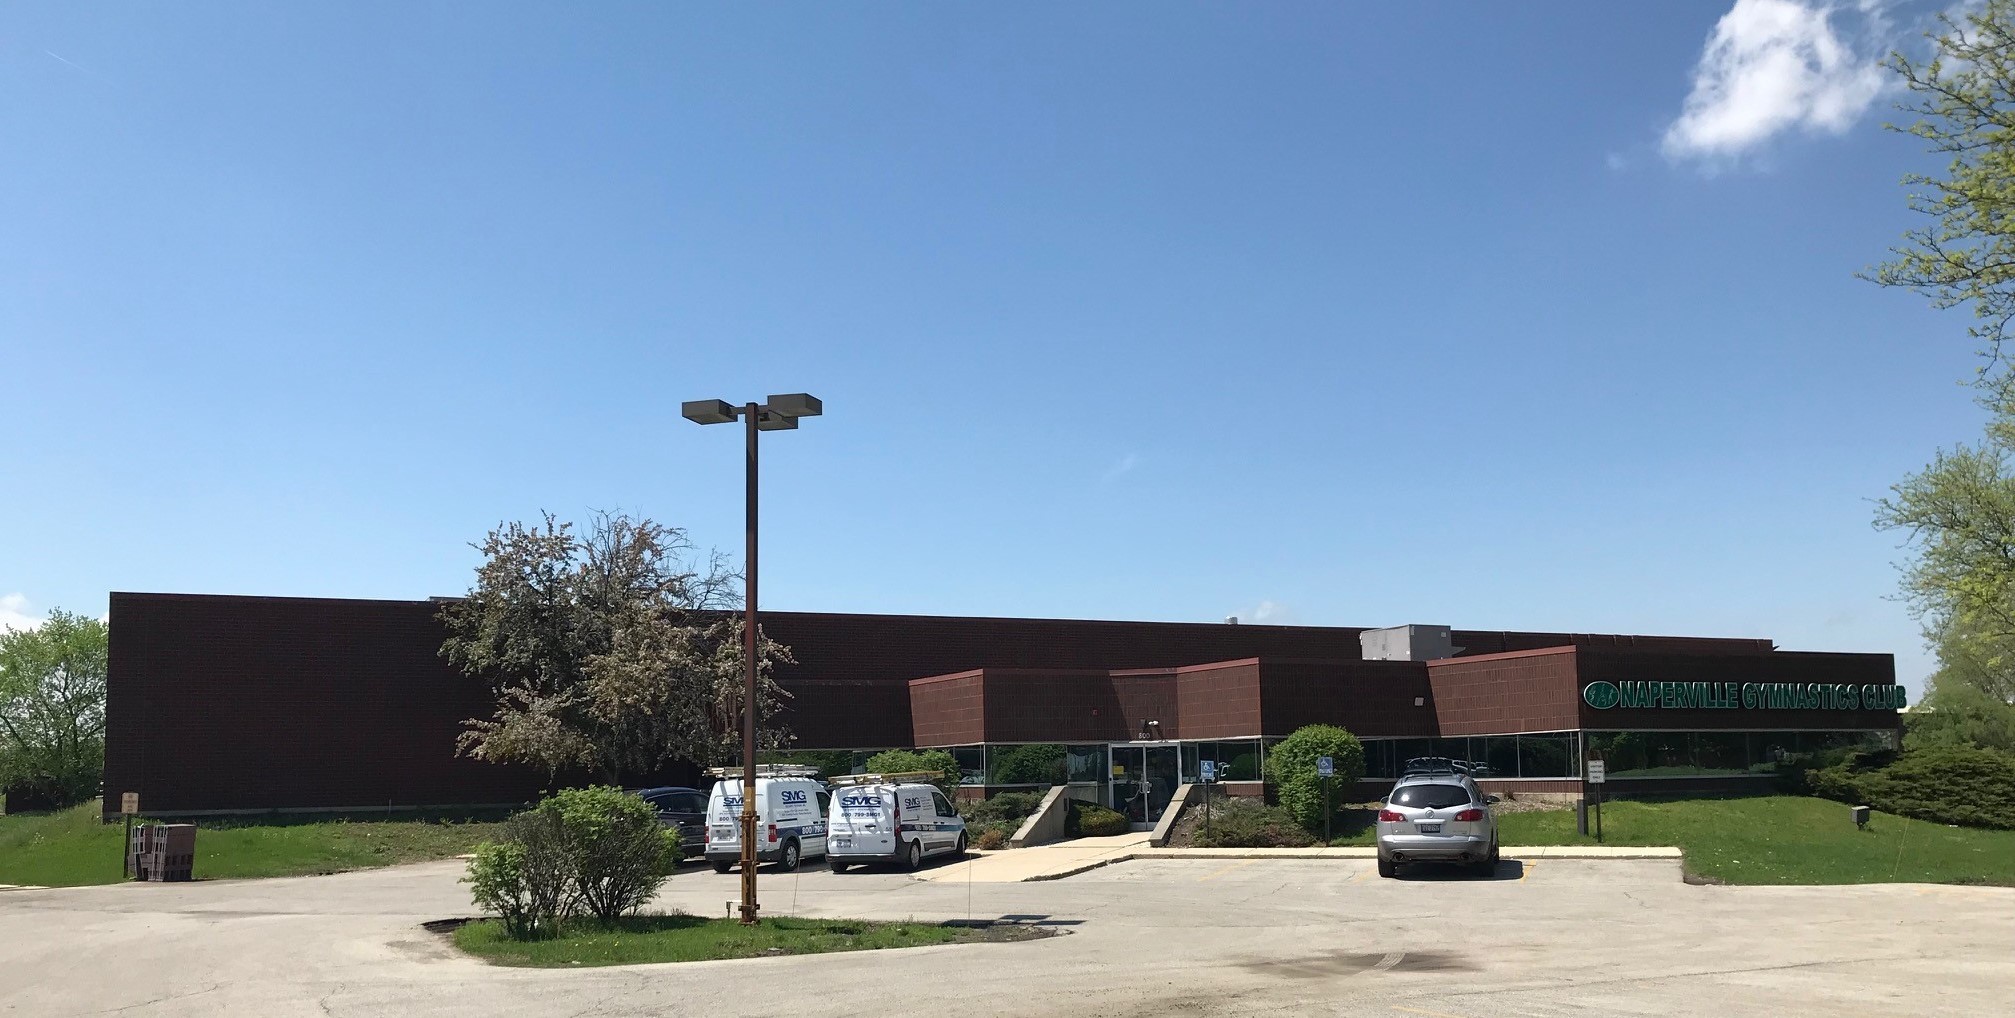 800 Enterprise_Naperville_Cawley Commercial Real Estate Commercial Real Estate